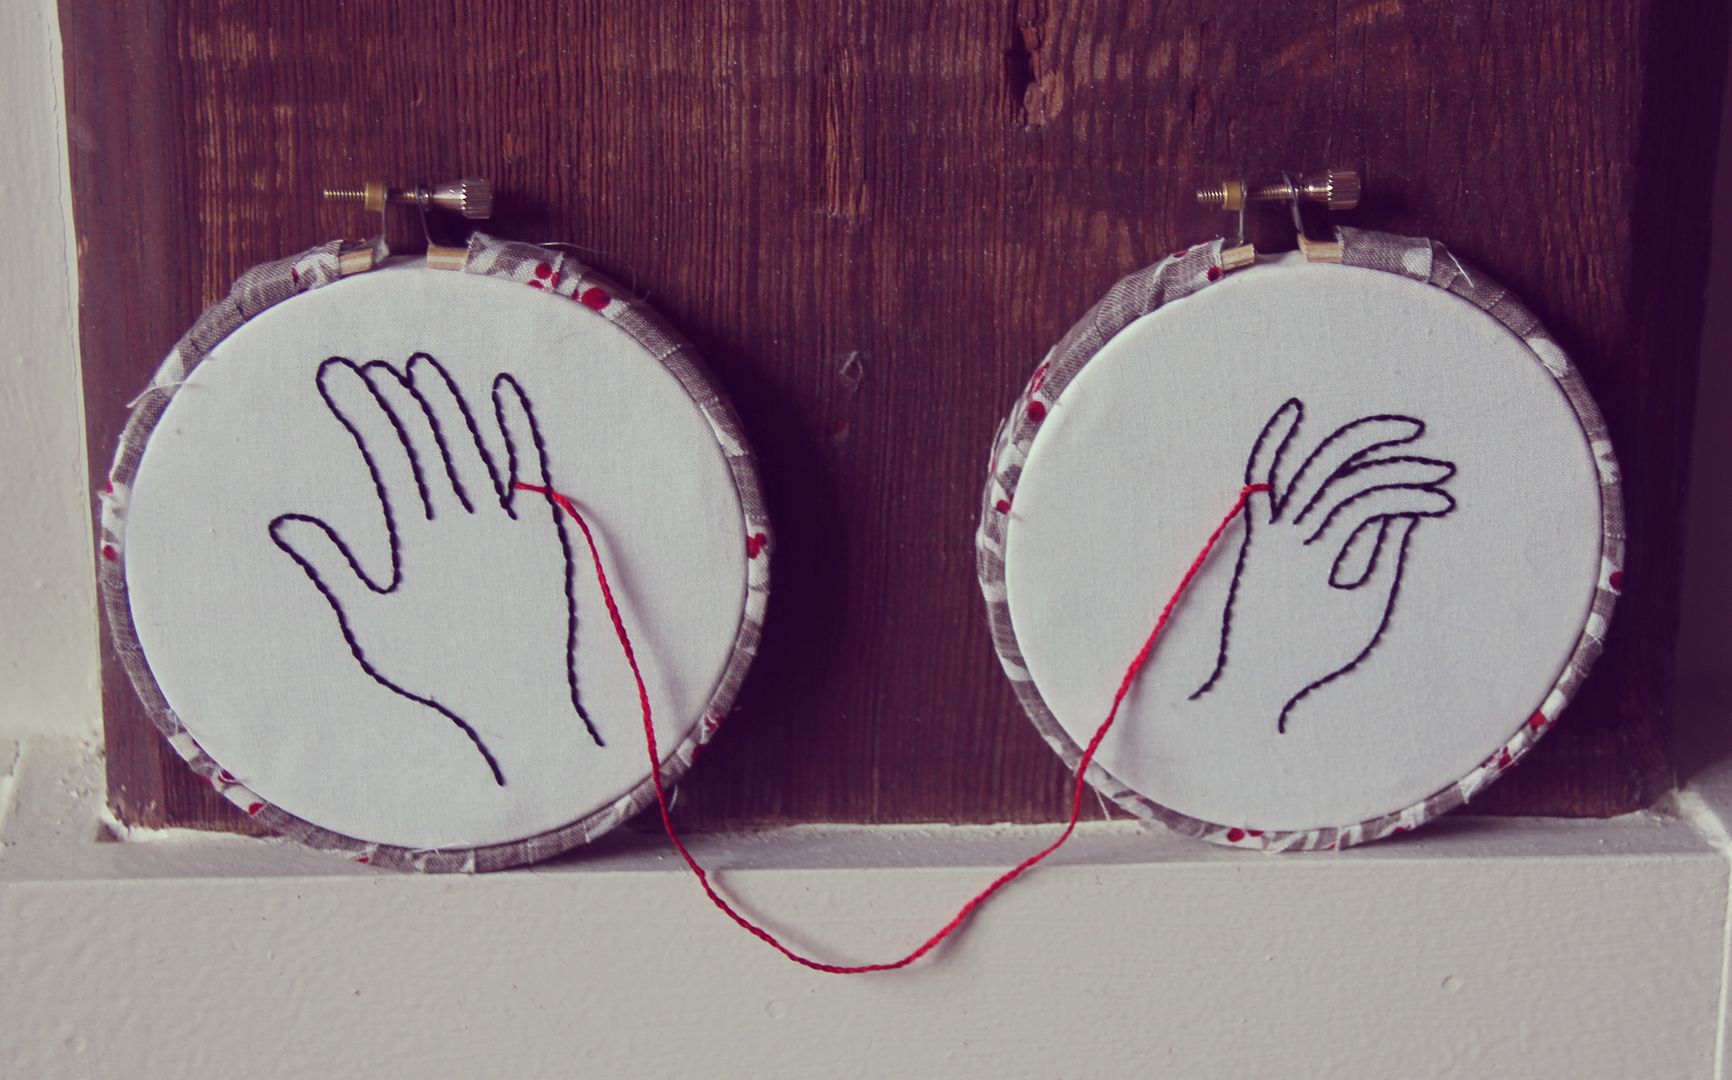 Red String of Fate Embroidery Hoop // Ten Feet Off Beale http://www.tenfeetoffbeale.com